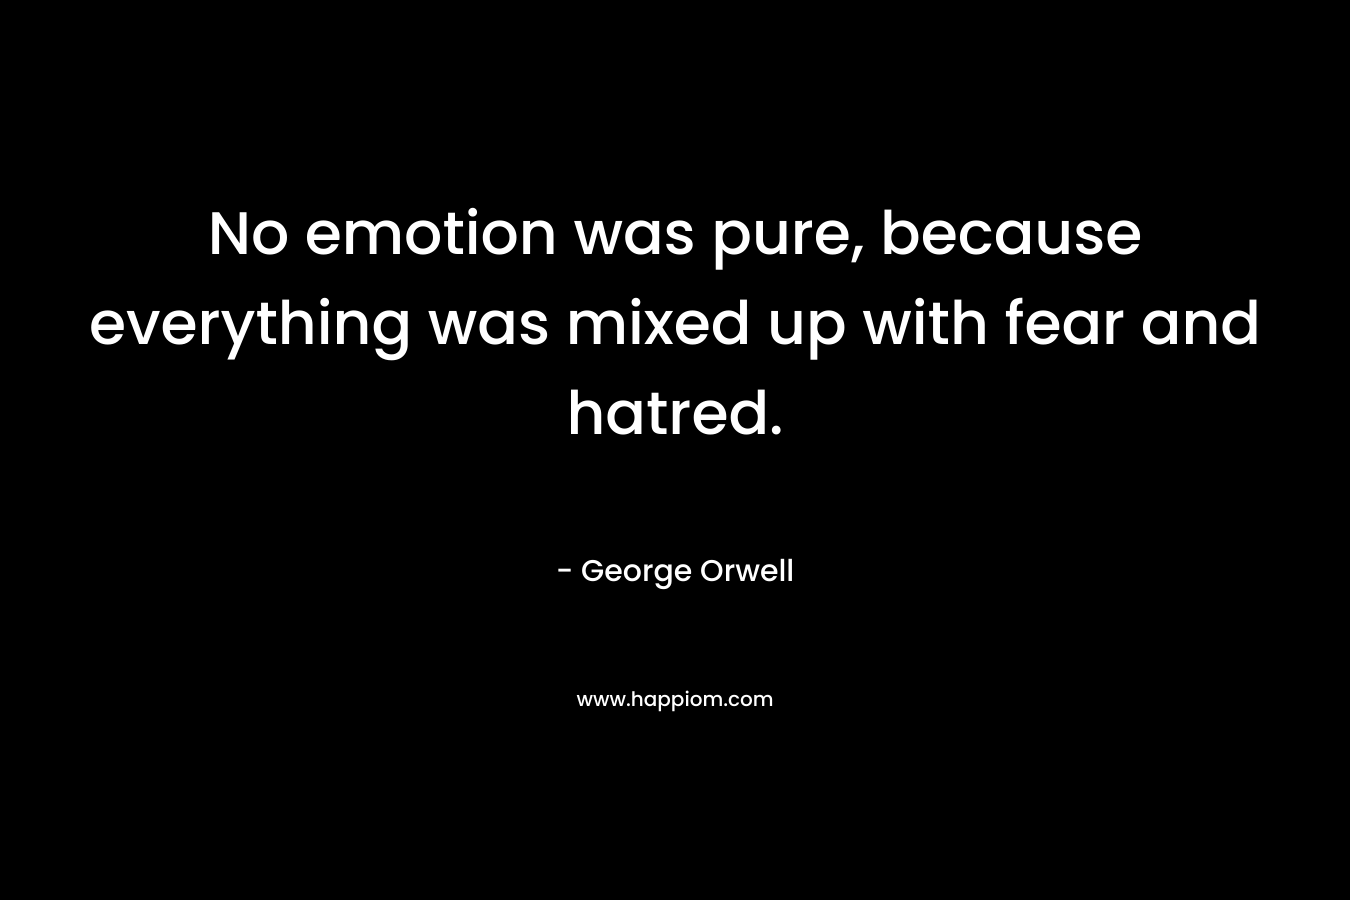 No emotion was pure, because everything was mixed up with fear and hatred. – George Orwell